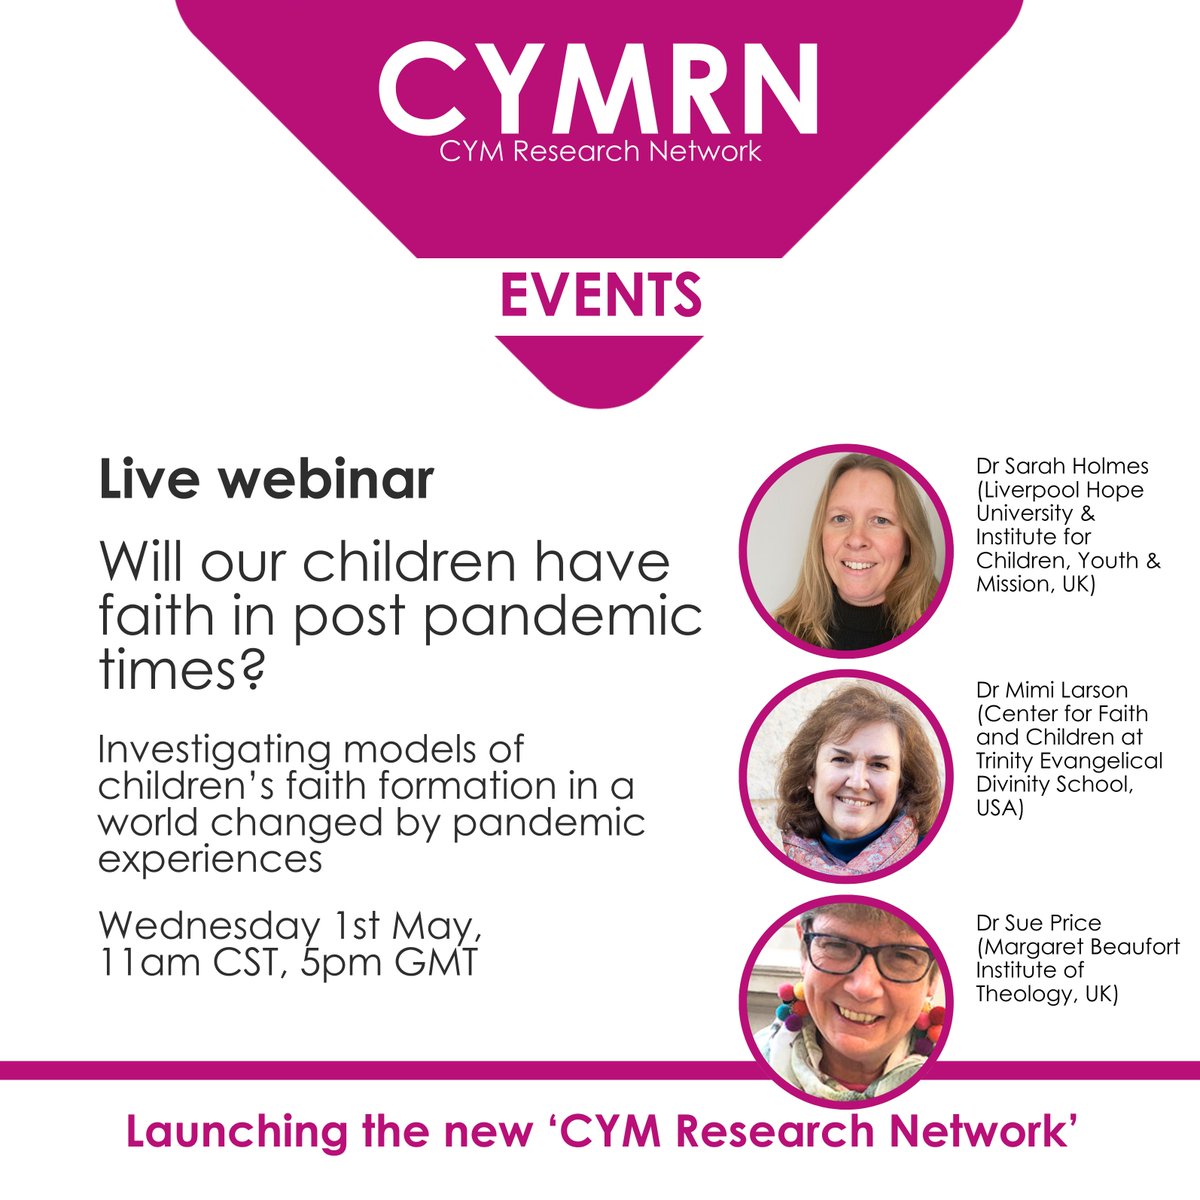 LIVE webinar - 'Will our children have faith in post pandemic times?' We'll be investigating models of children’s faith formation in a world changed by pandemic experiences on Wednesday 1st May, 11am CST, 5pm GMT The webinar is free, sign up through the link in the bio.